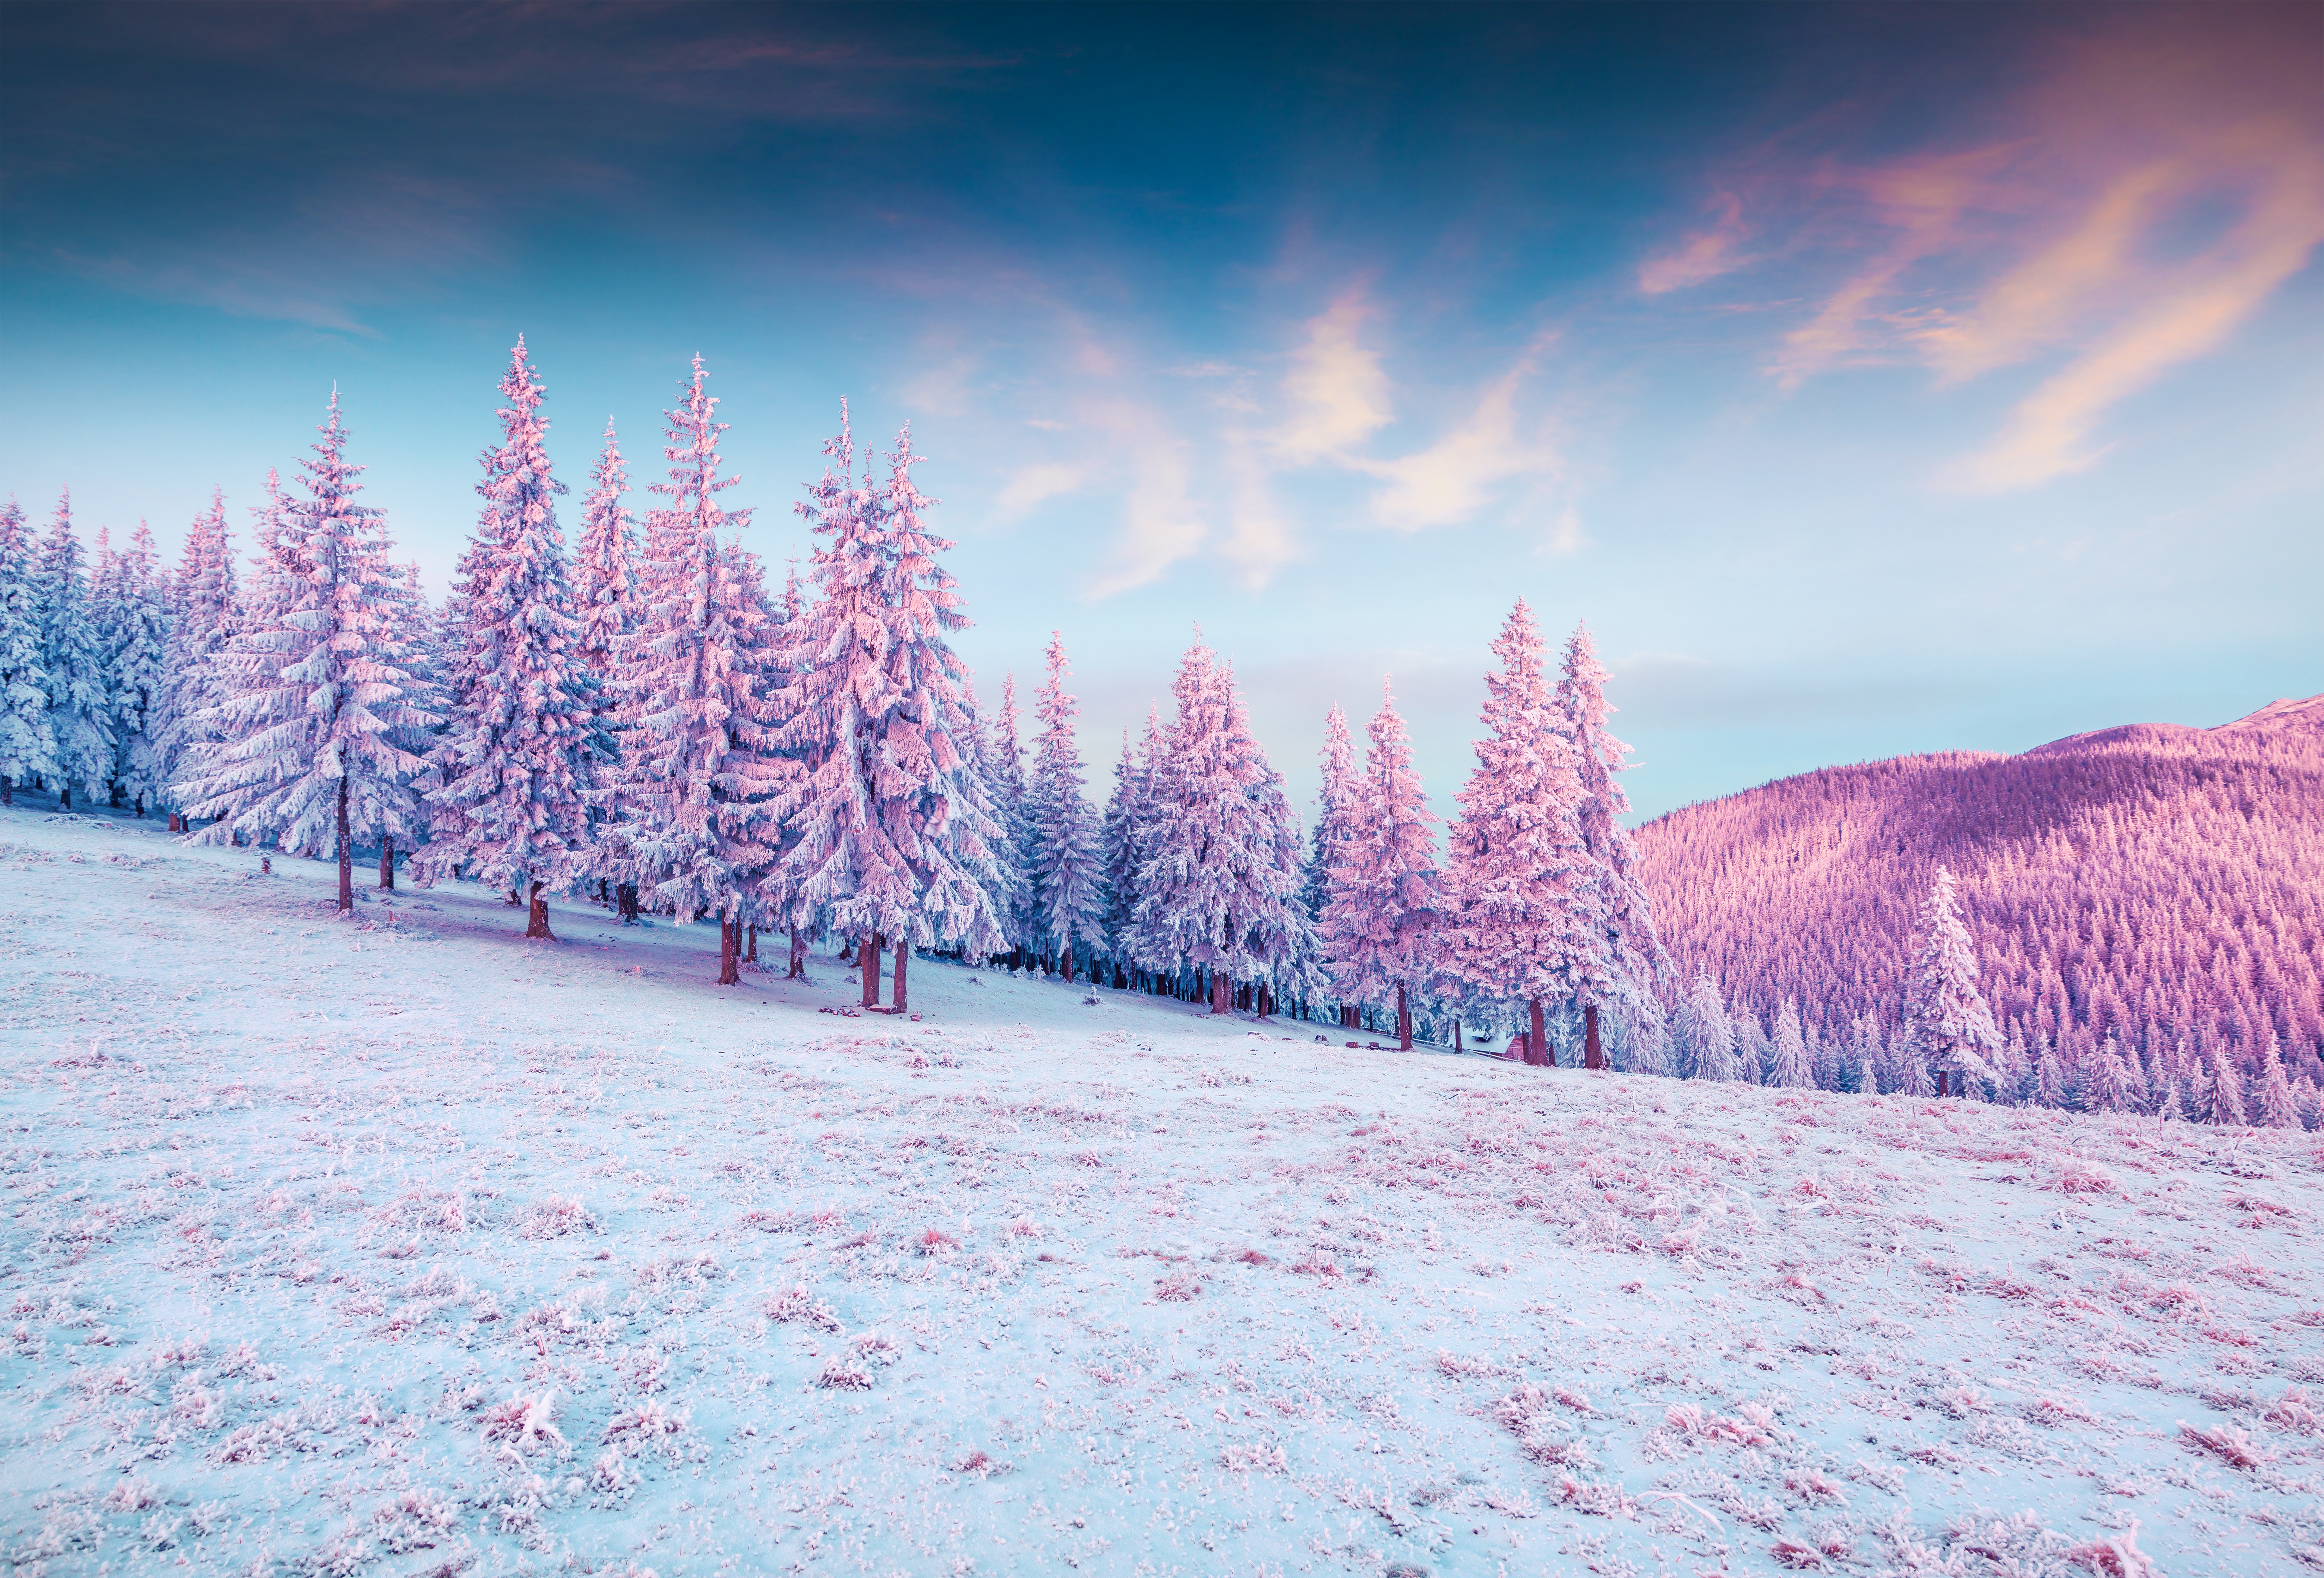 General 5891x4000 winter fir nature landscape hills mountains snow sky forest trees pink white cold colorful clouds sunlight